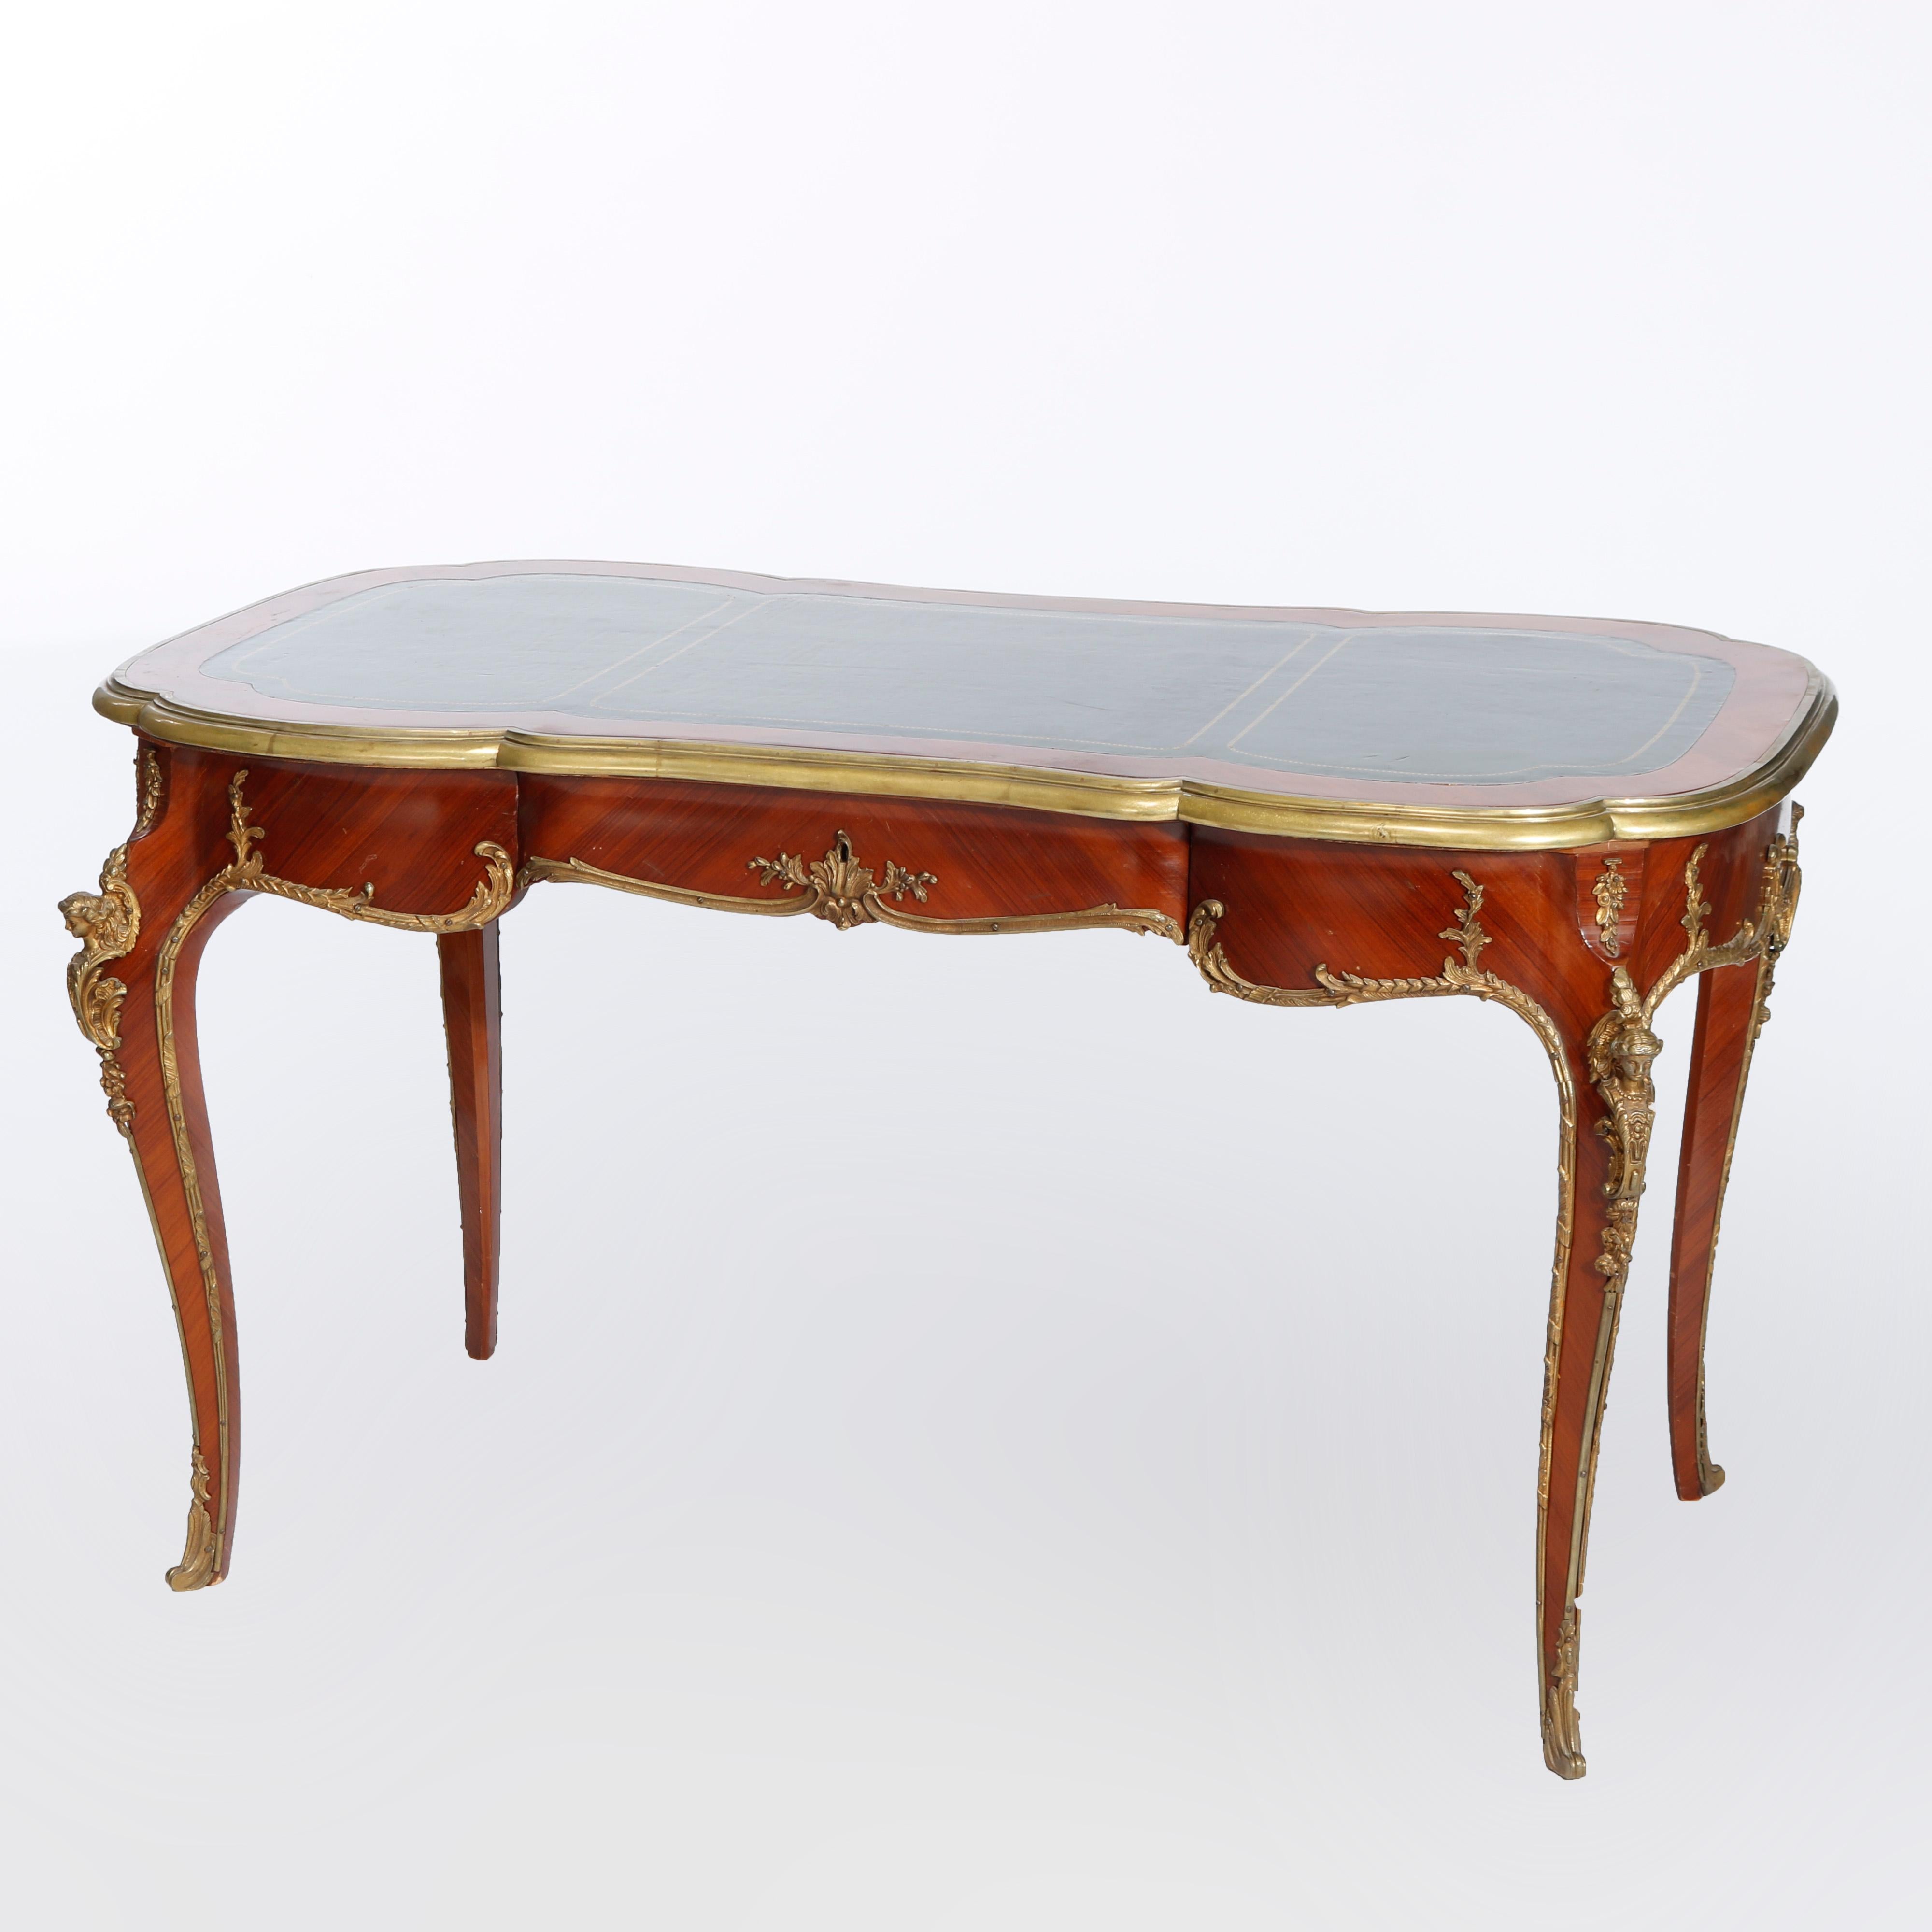 An antique French Louis XVI style bureau plat writing desk offers satinwood construction with shaped top having gilt-decorated leather writing surface on case with bookmatched facing, single central drawer, raised on cabriole legs with figural